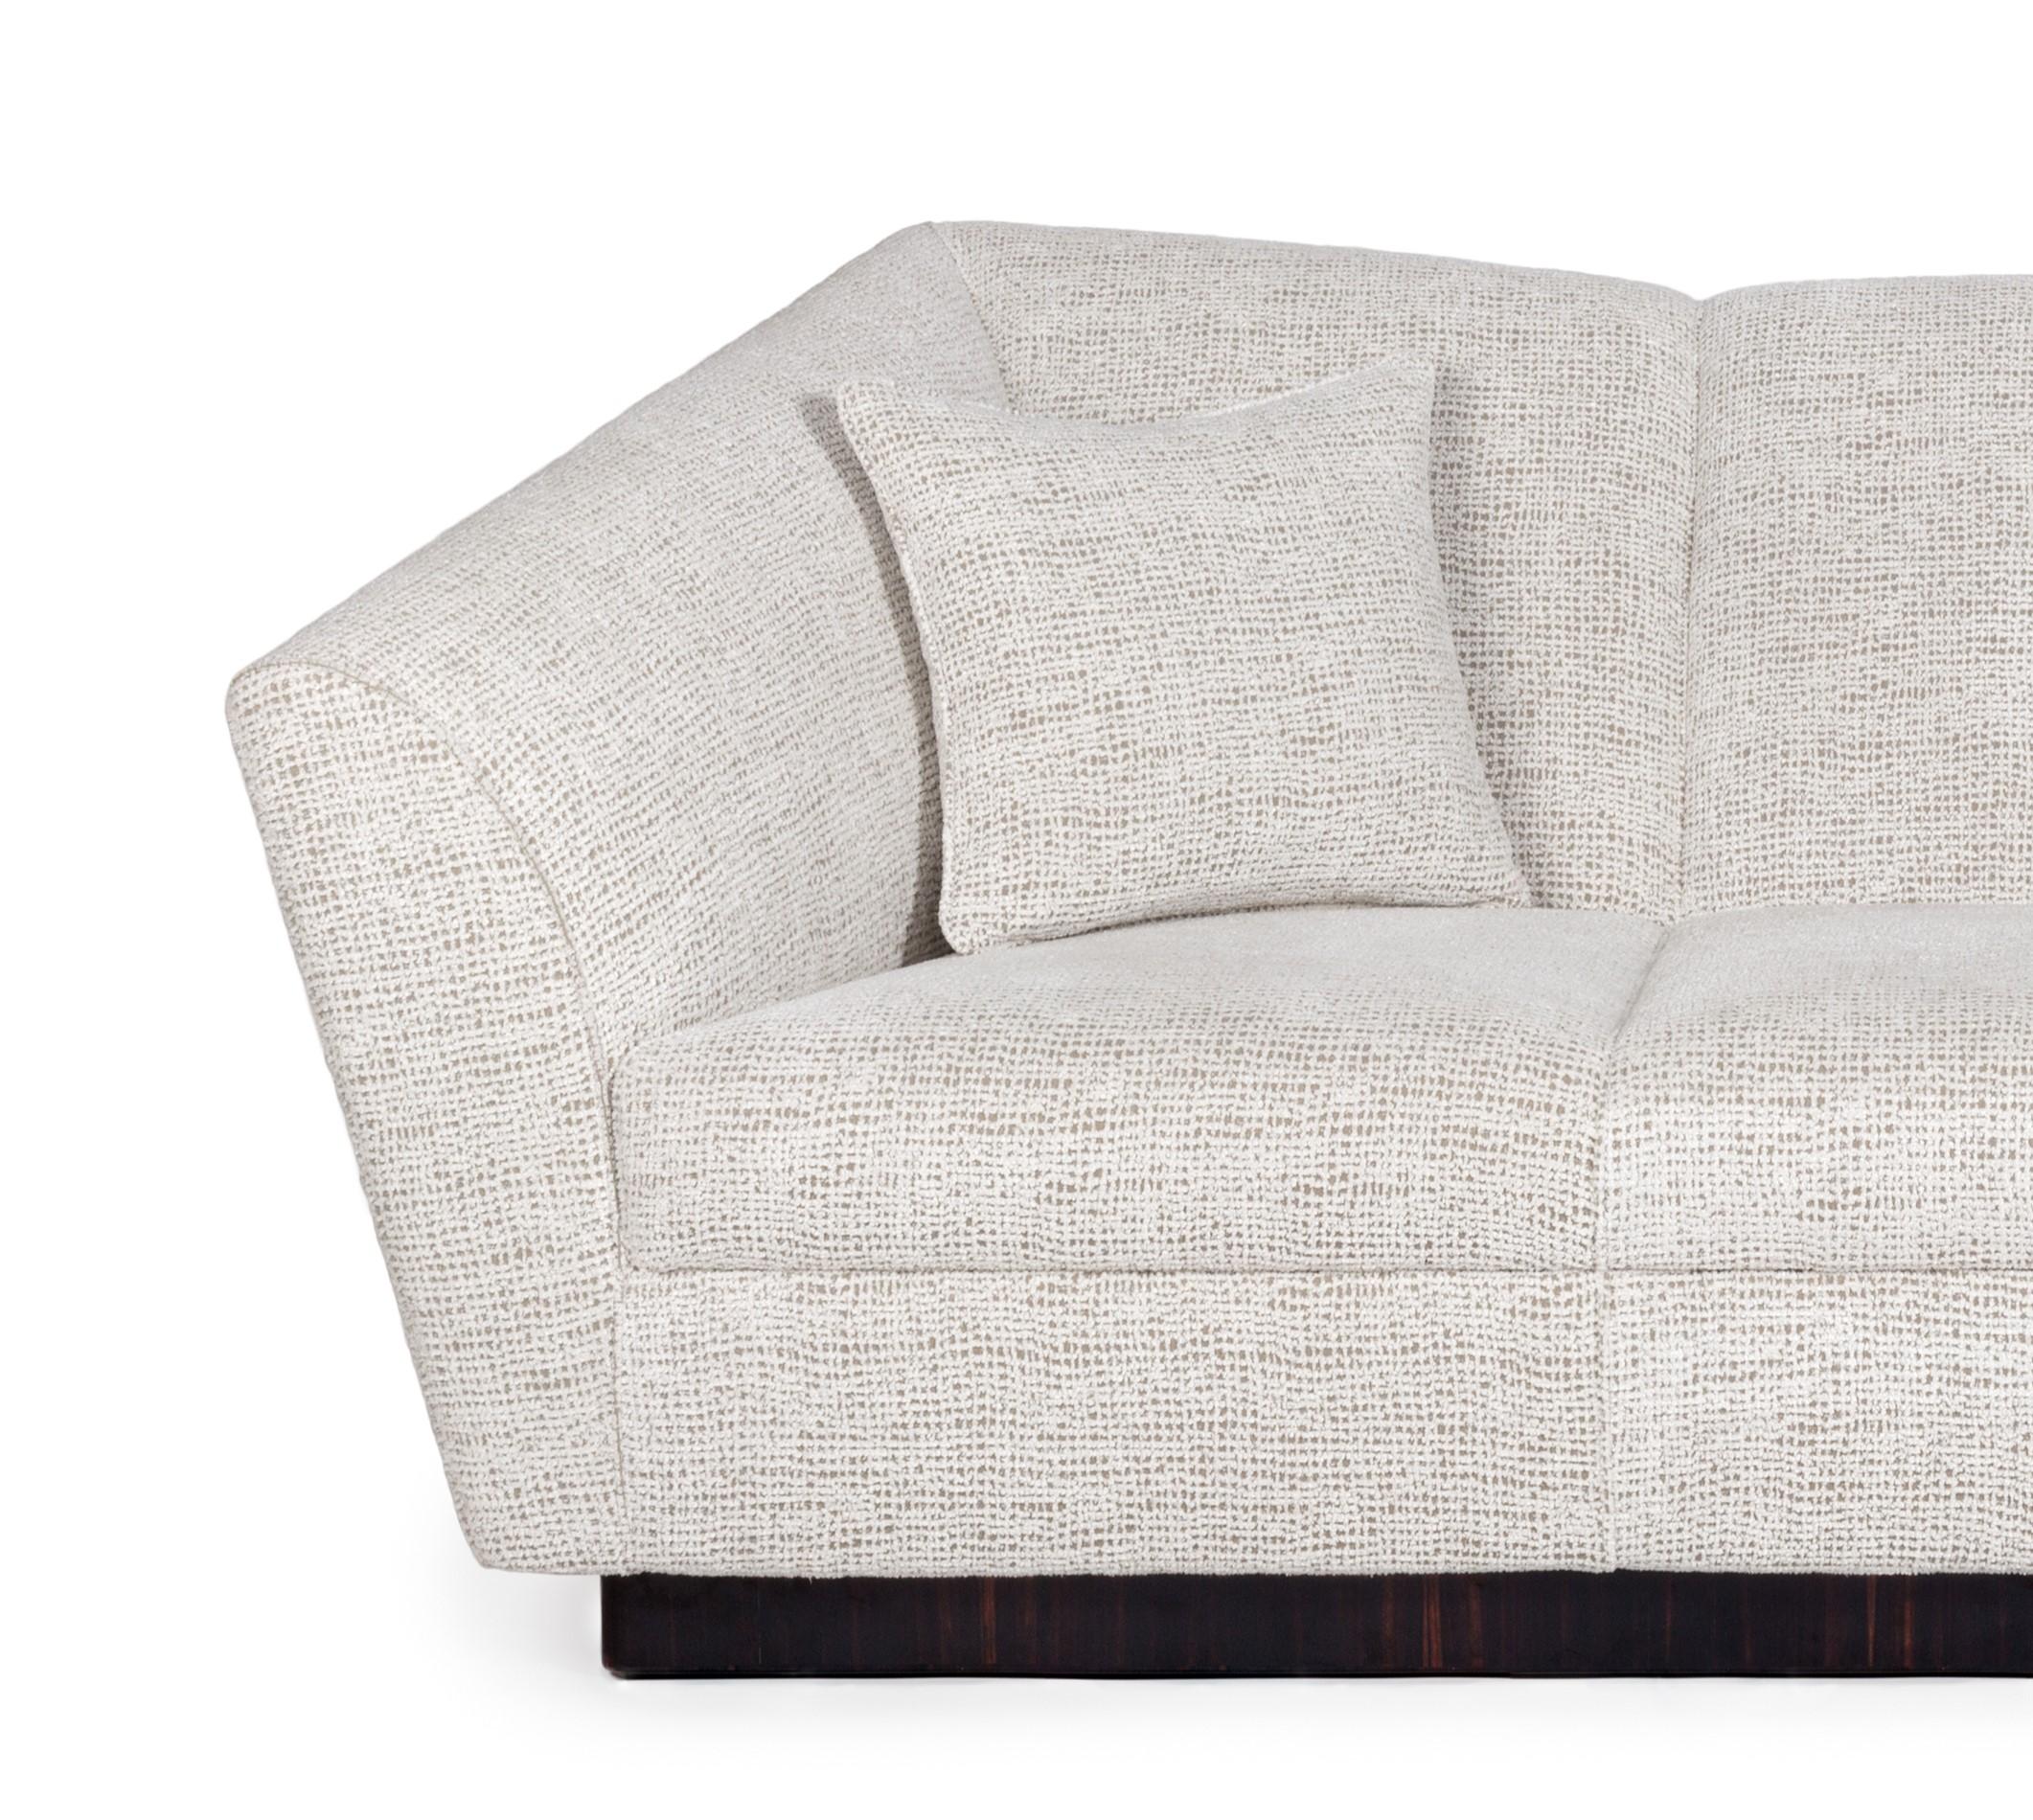 Other Eagle 3 Seat Sofa by InsidherLand For Sale